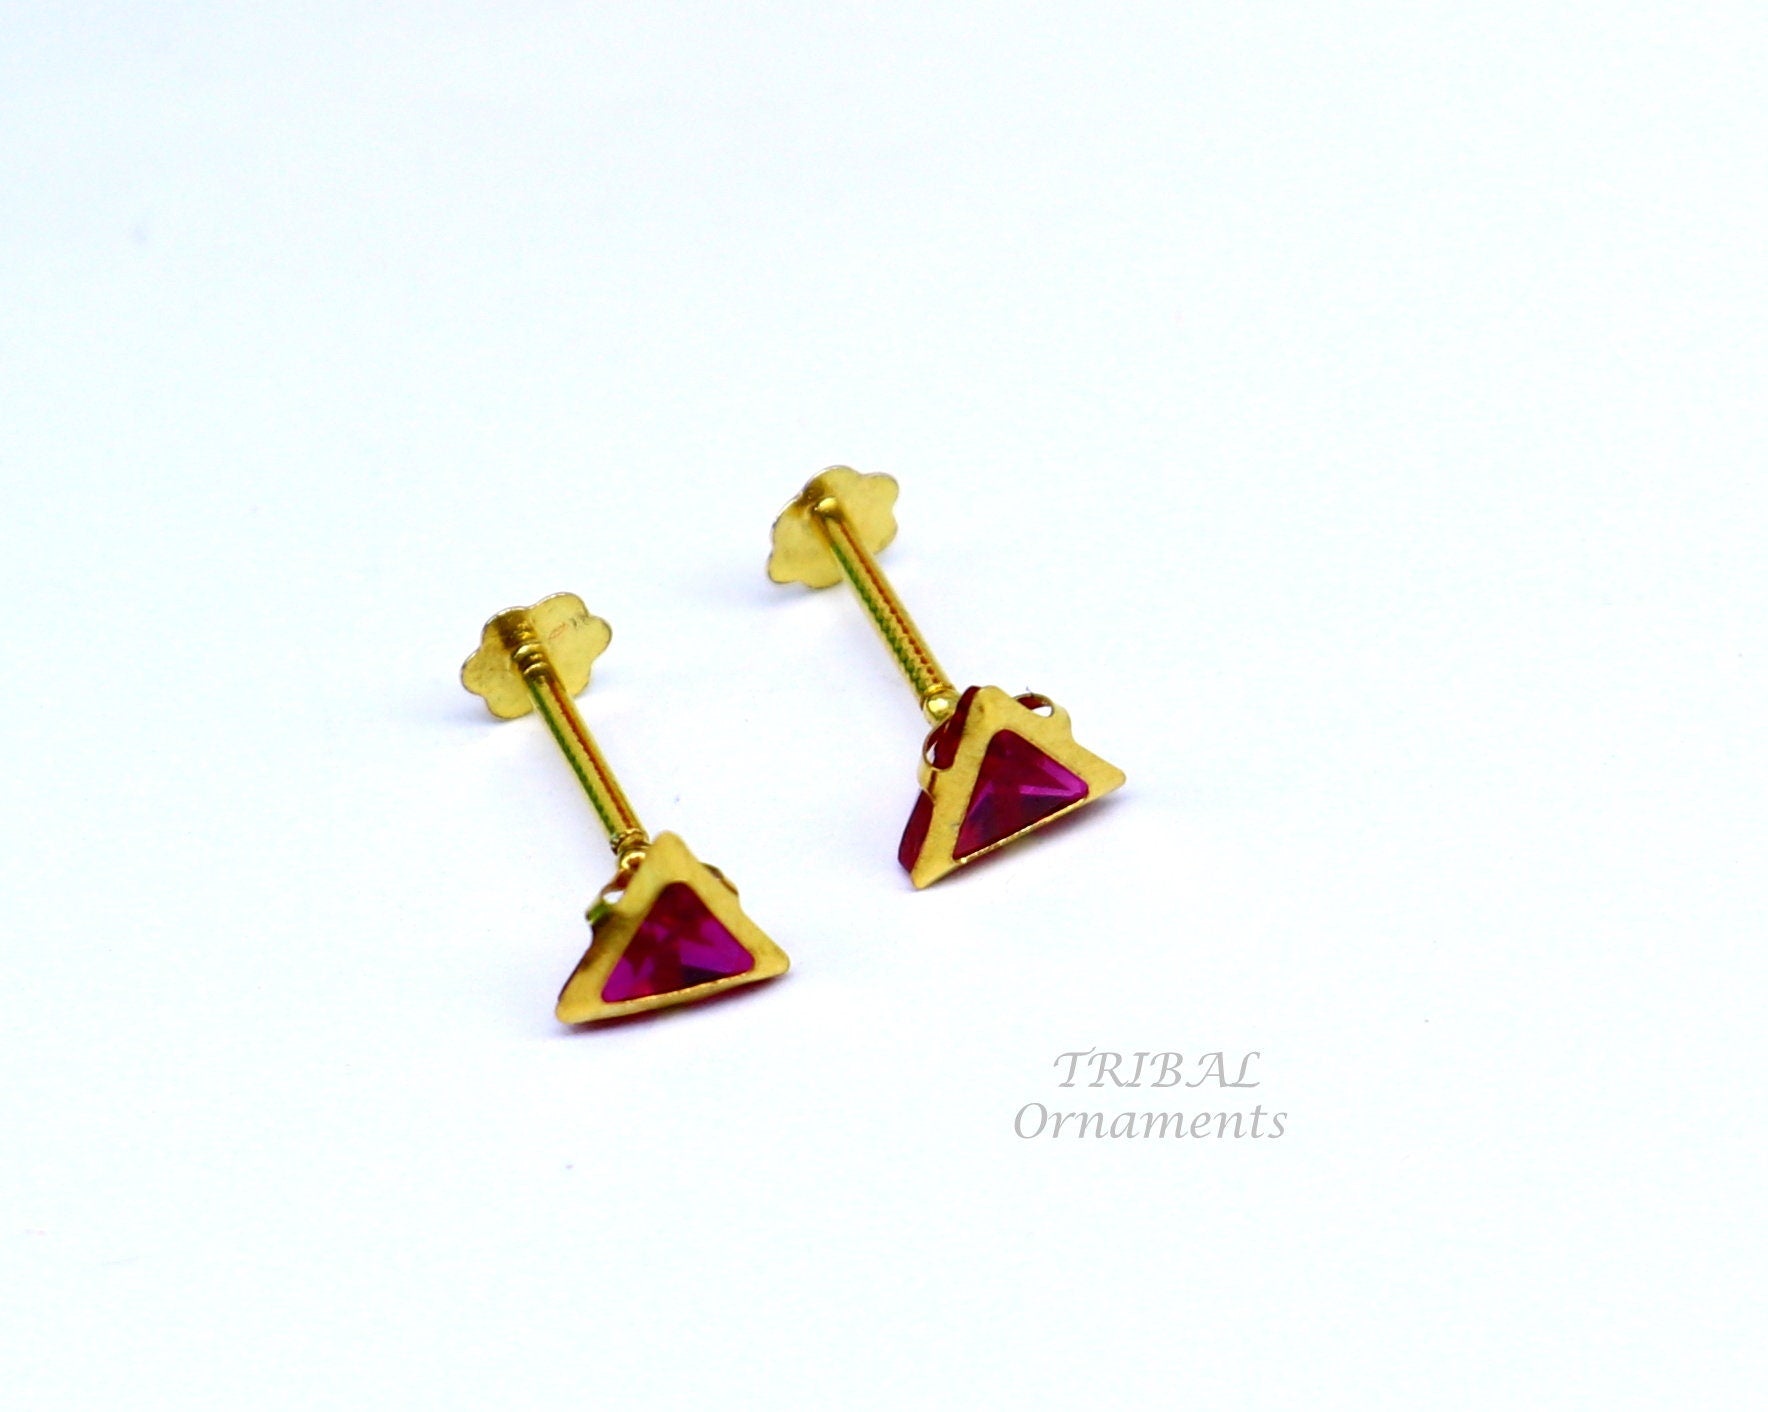 4mm 18kt yellow gold handmade single red stone Triangle shape stud earring cartilage earring customized unisex screw back jewelry er152 - TRIBAL ORNAMENTS